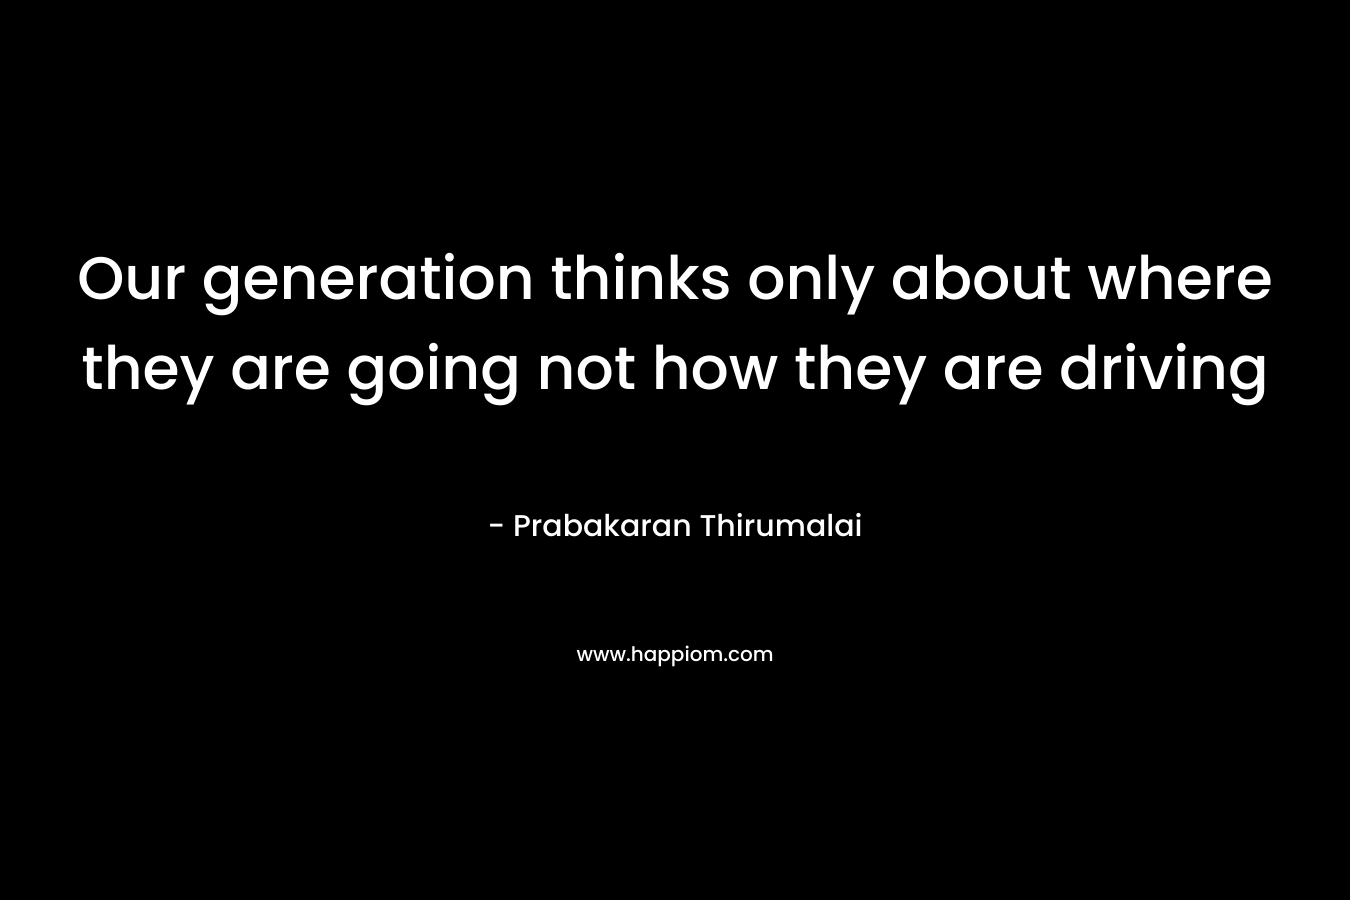 Our generation thinks only about where they are going not how they are driving